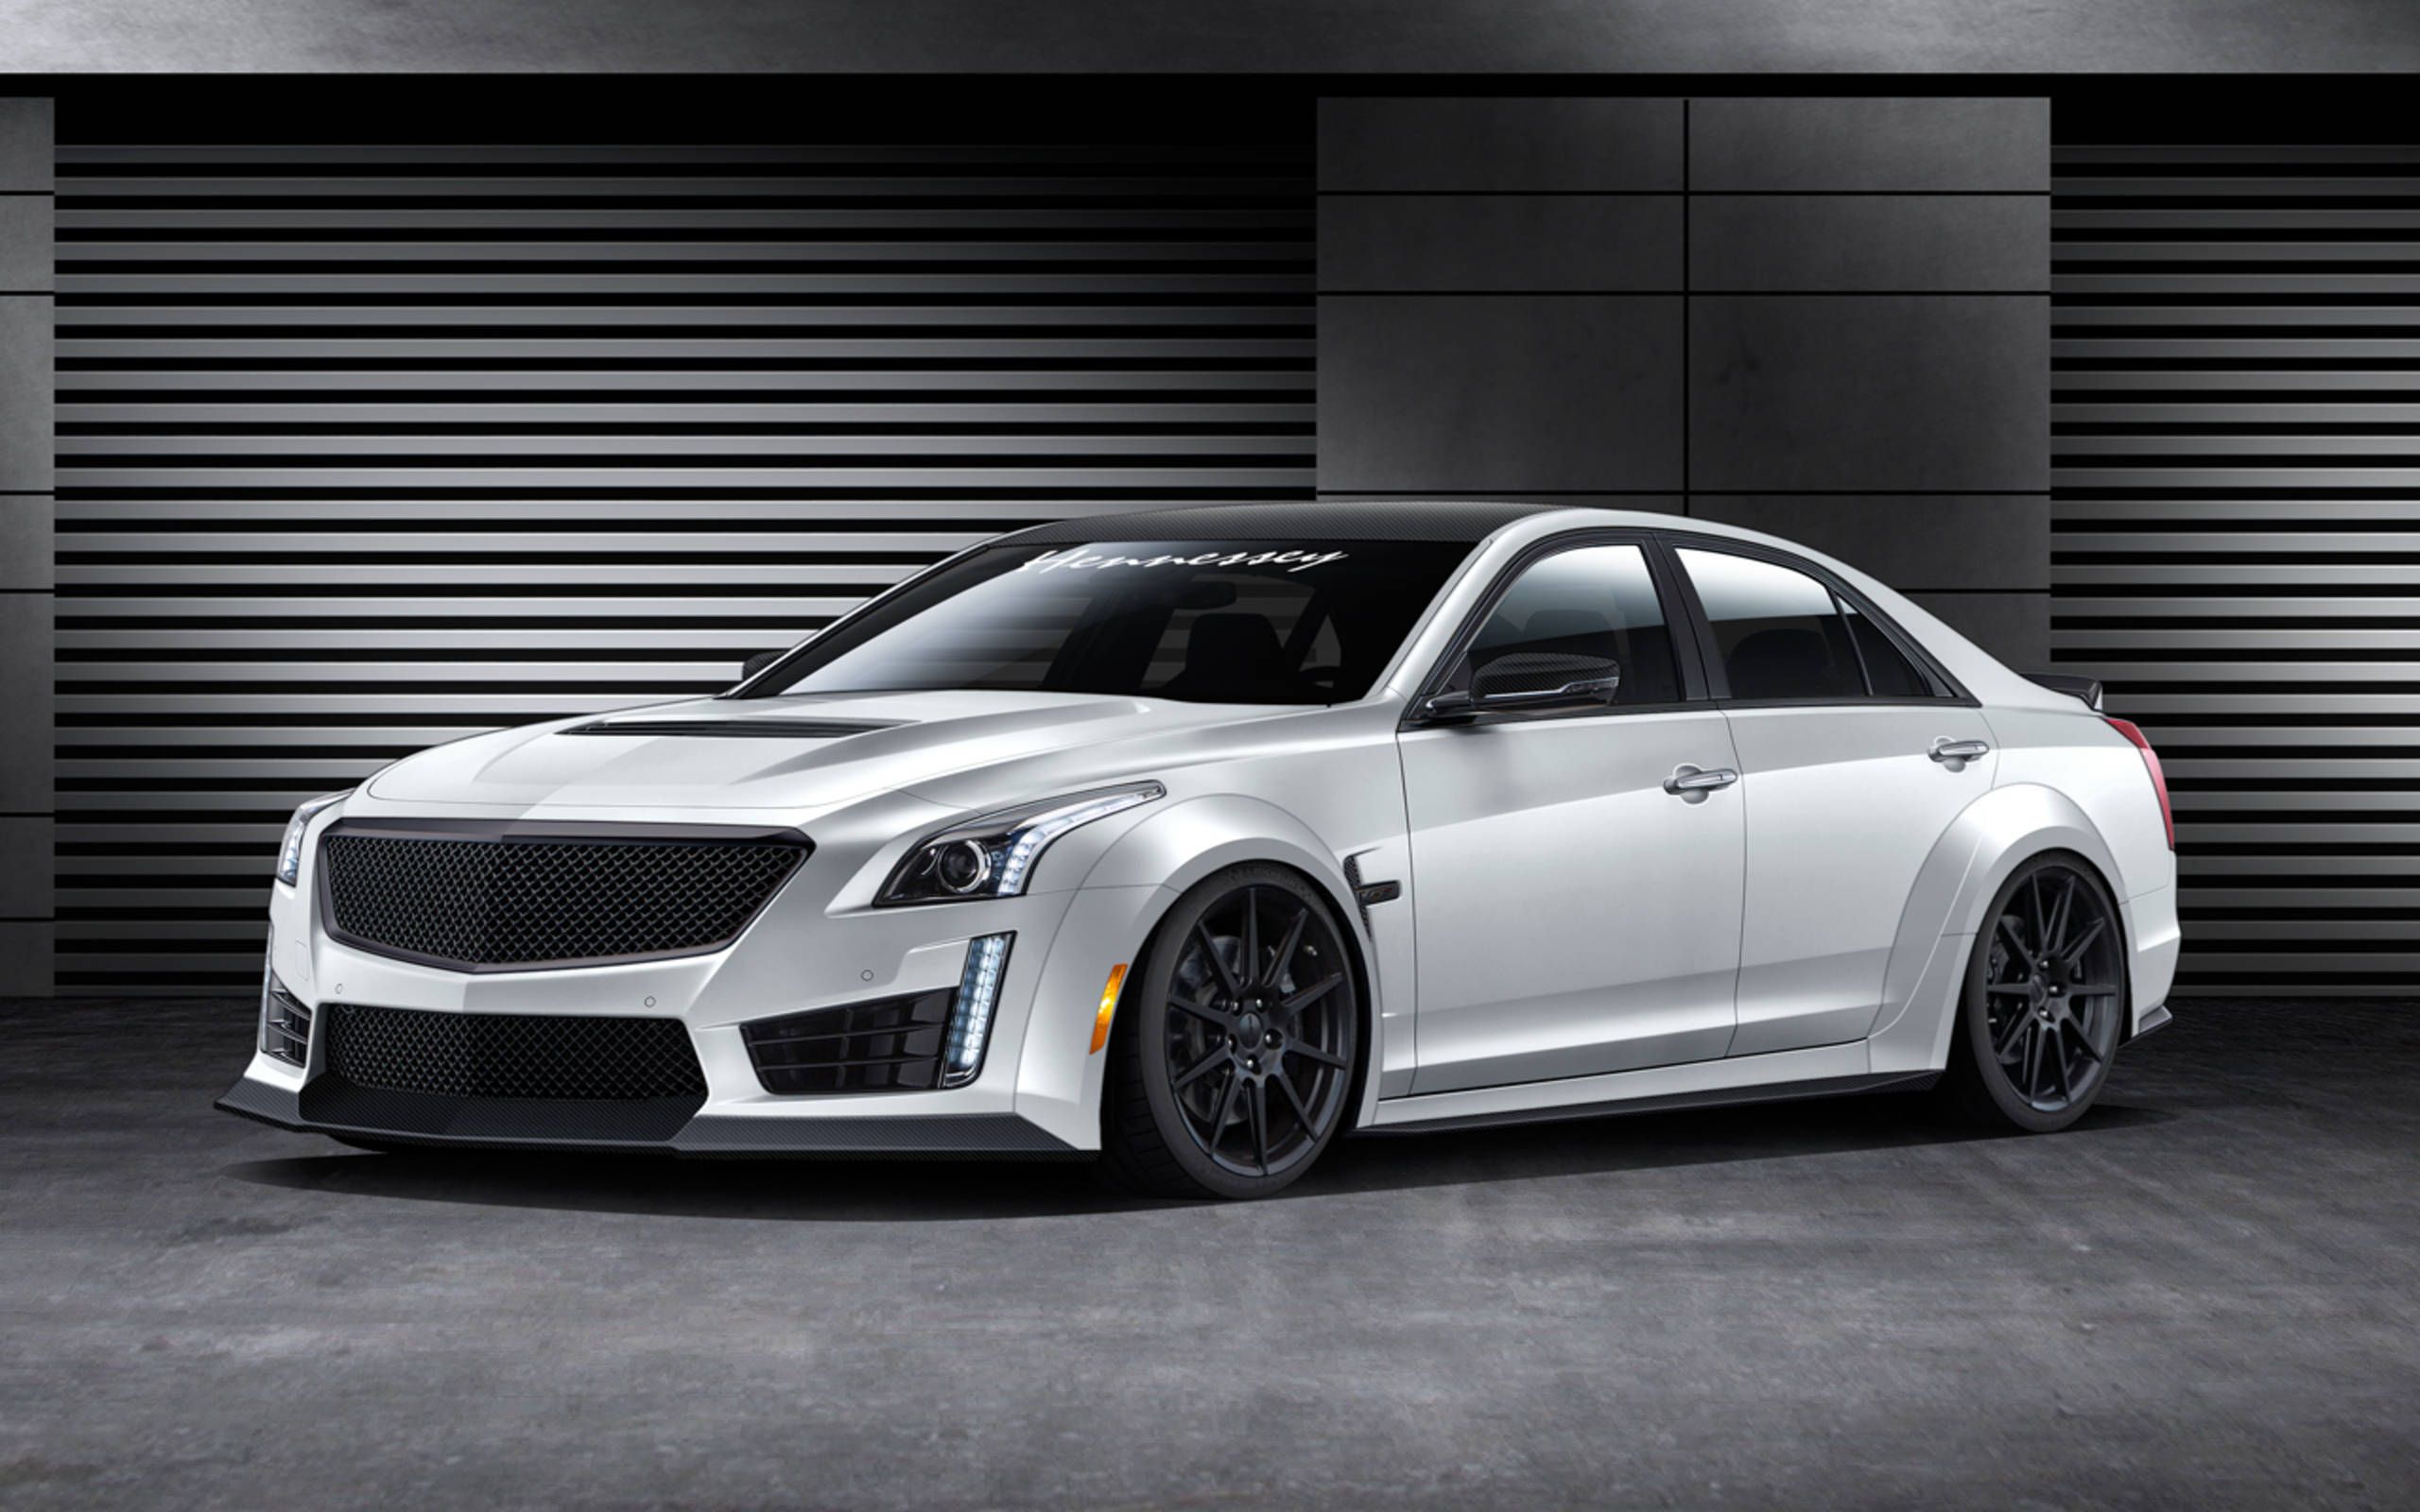 1,000-hp 2016 CTS-V: Hennessey builds a Caddy rocket